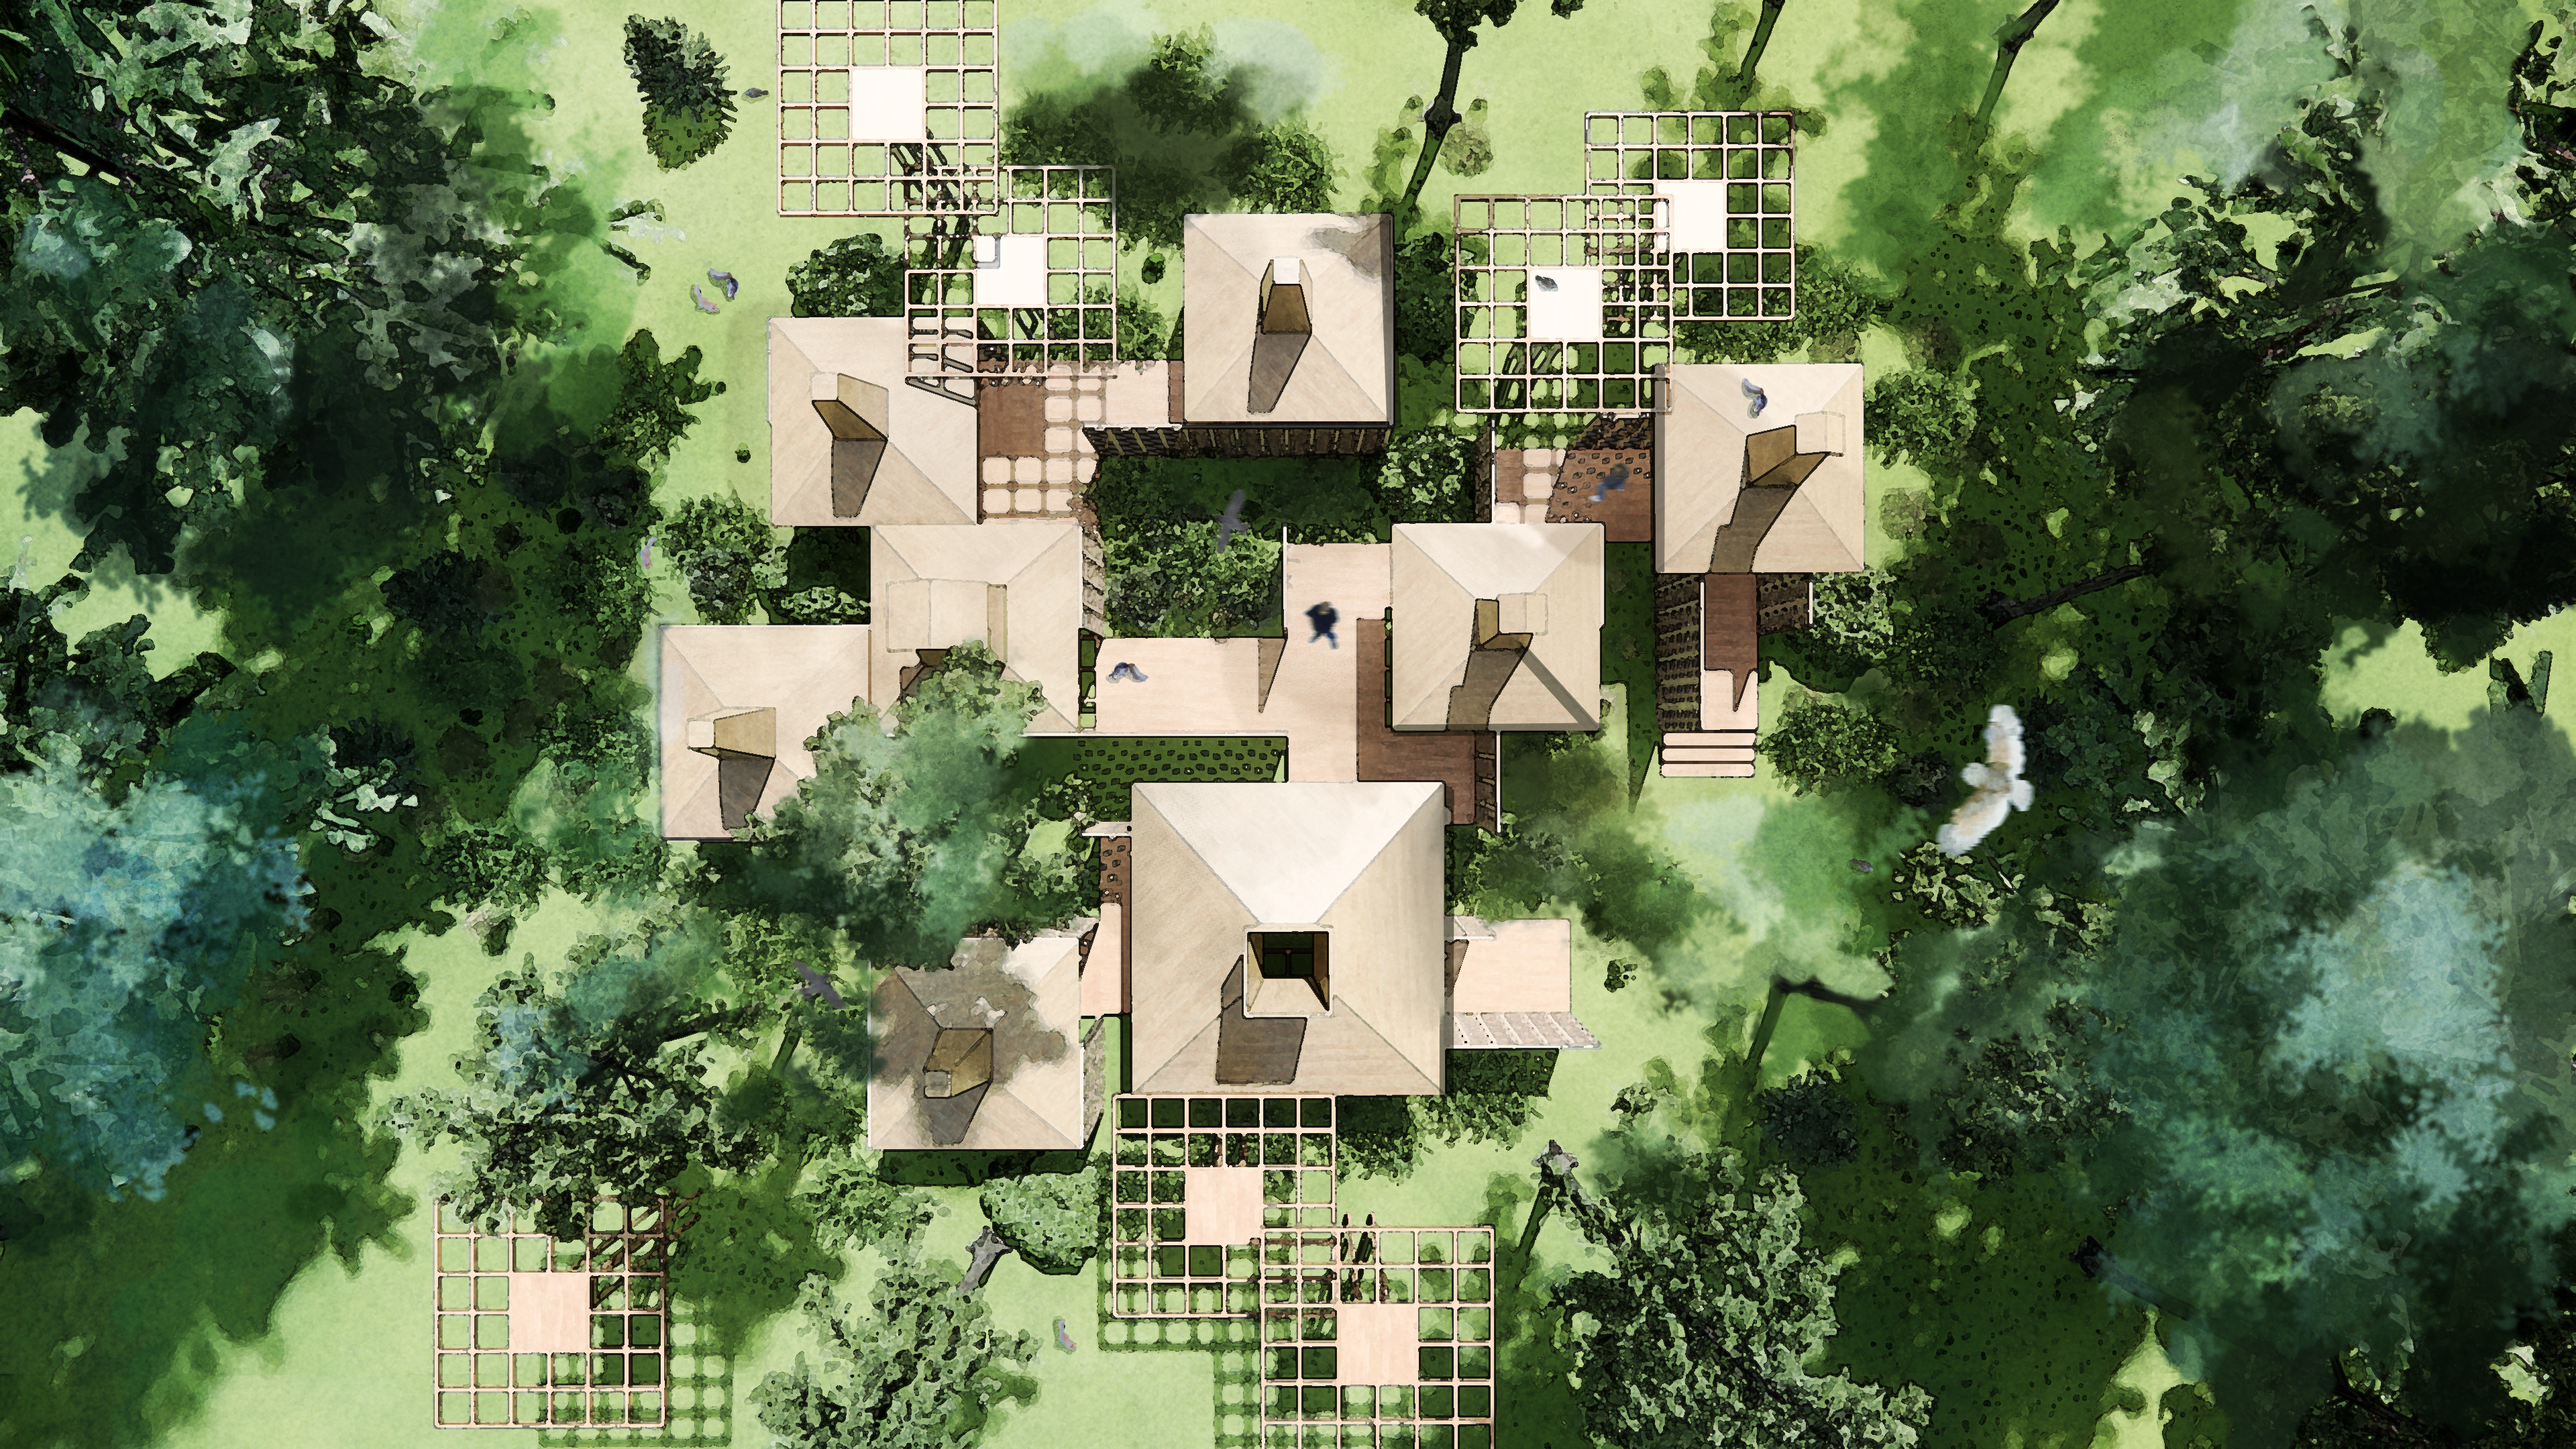 image of site plan from above with greenery